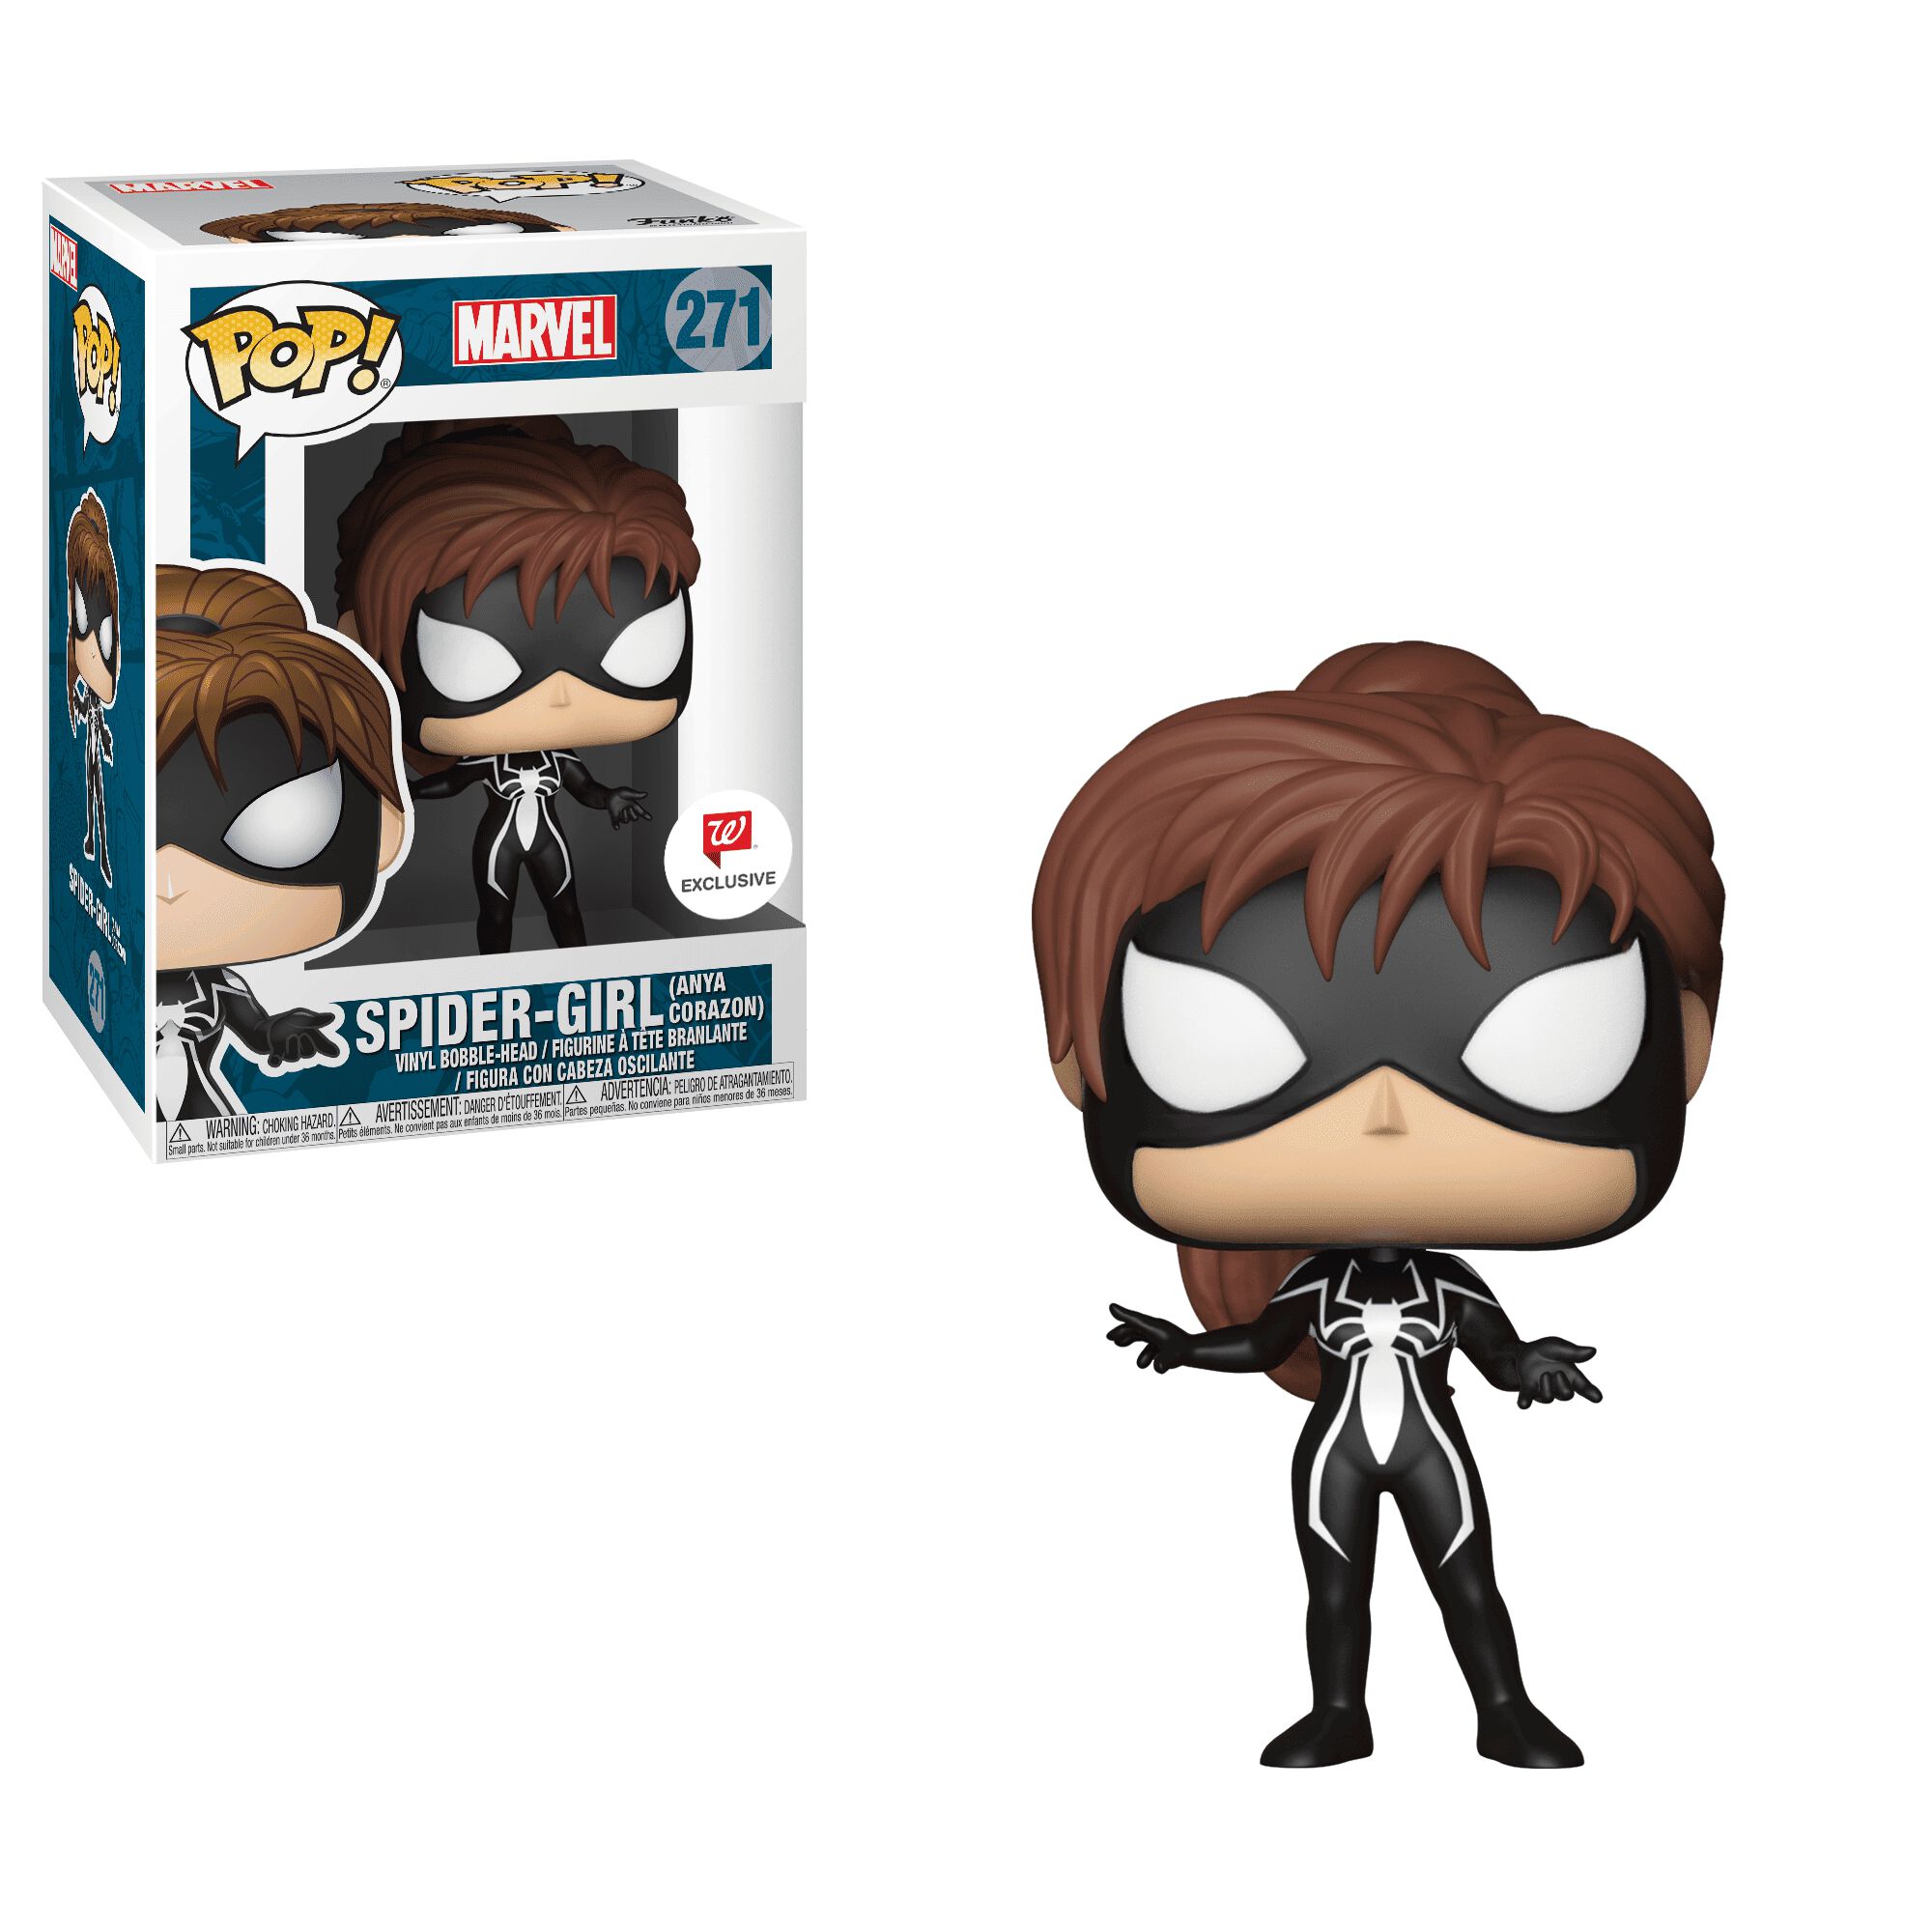 Available Now: Walgreens Marvel Spider-Girl Pop!